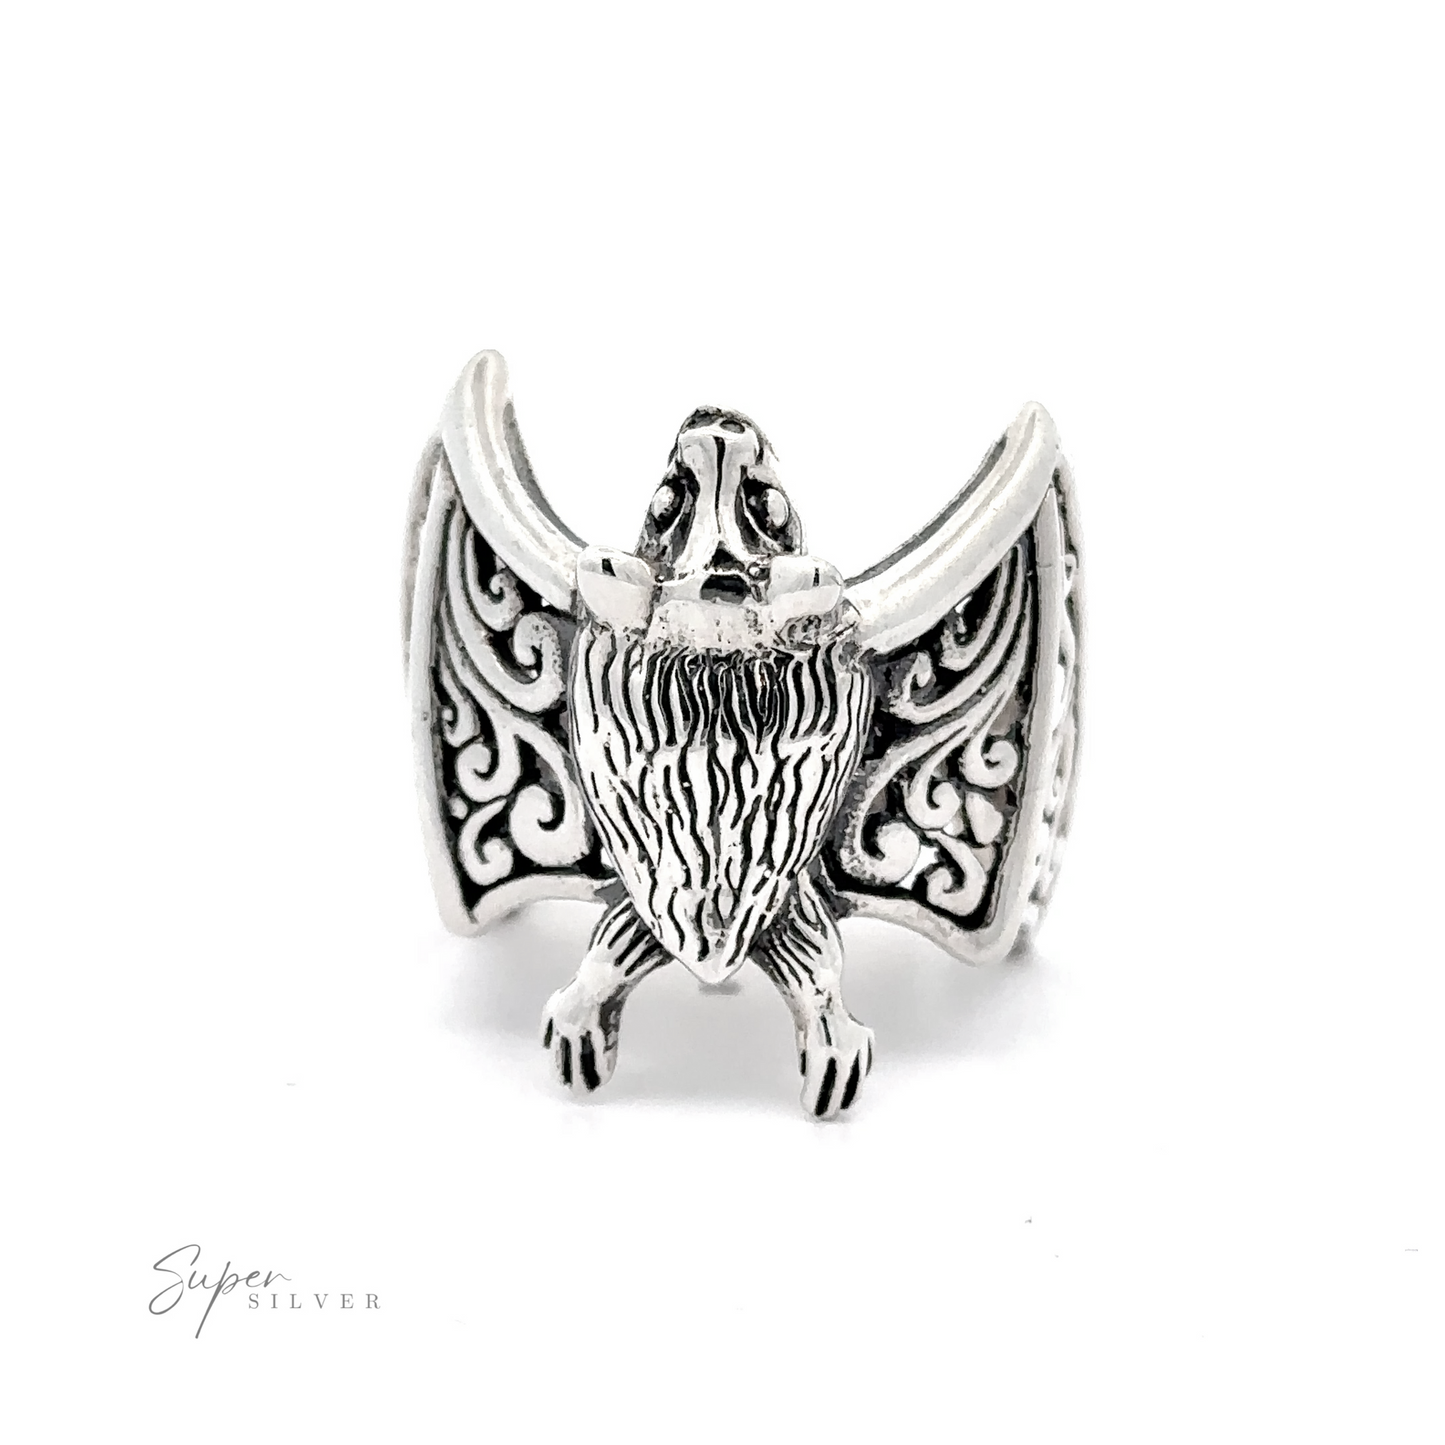 Statement Bat Ring shaped like an eagle with spread wings and detailed engraving, displayed on a white background.